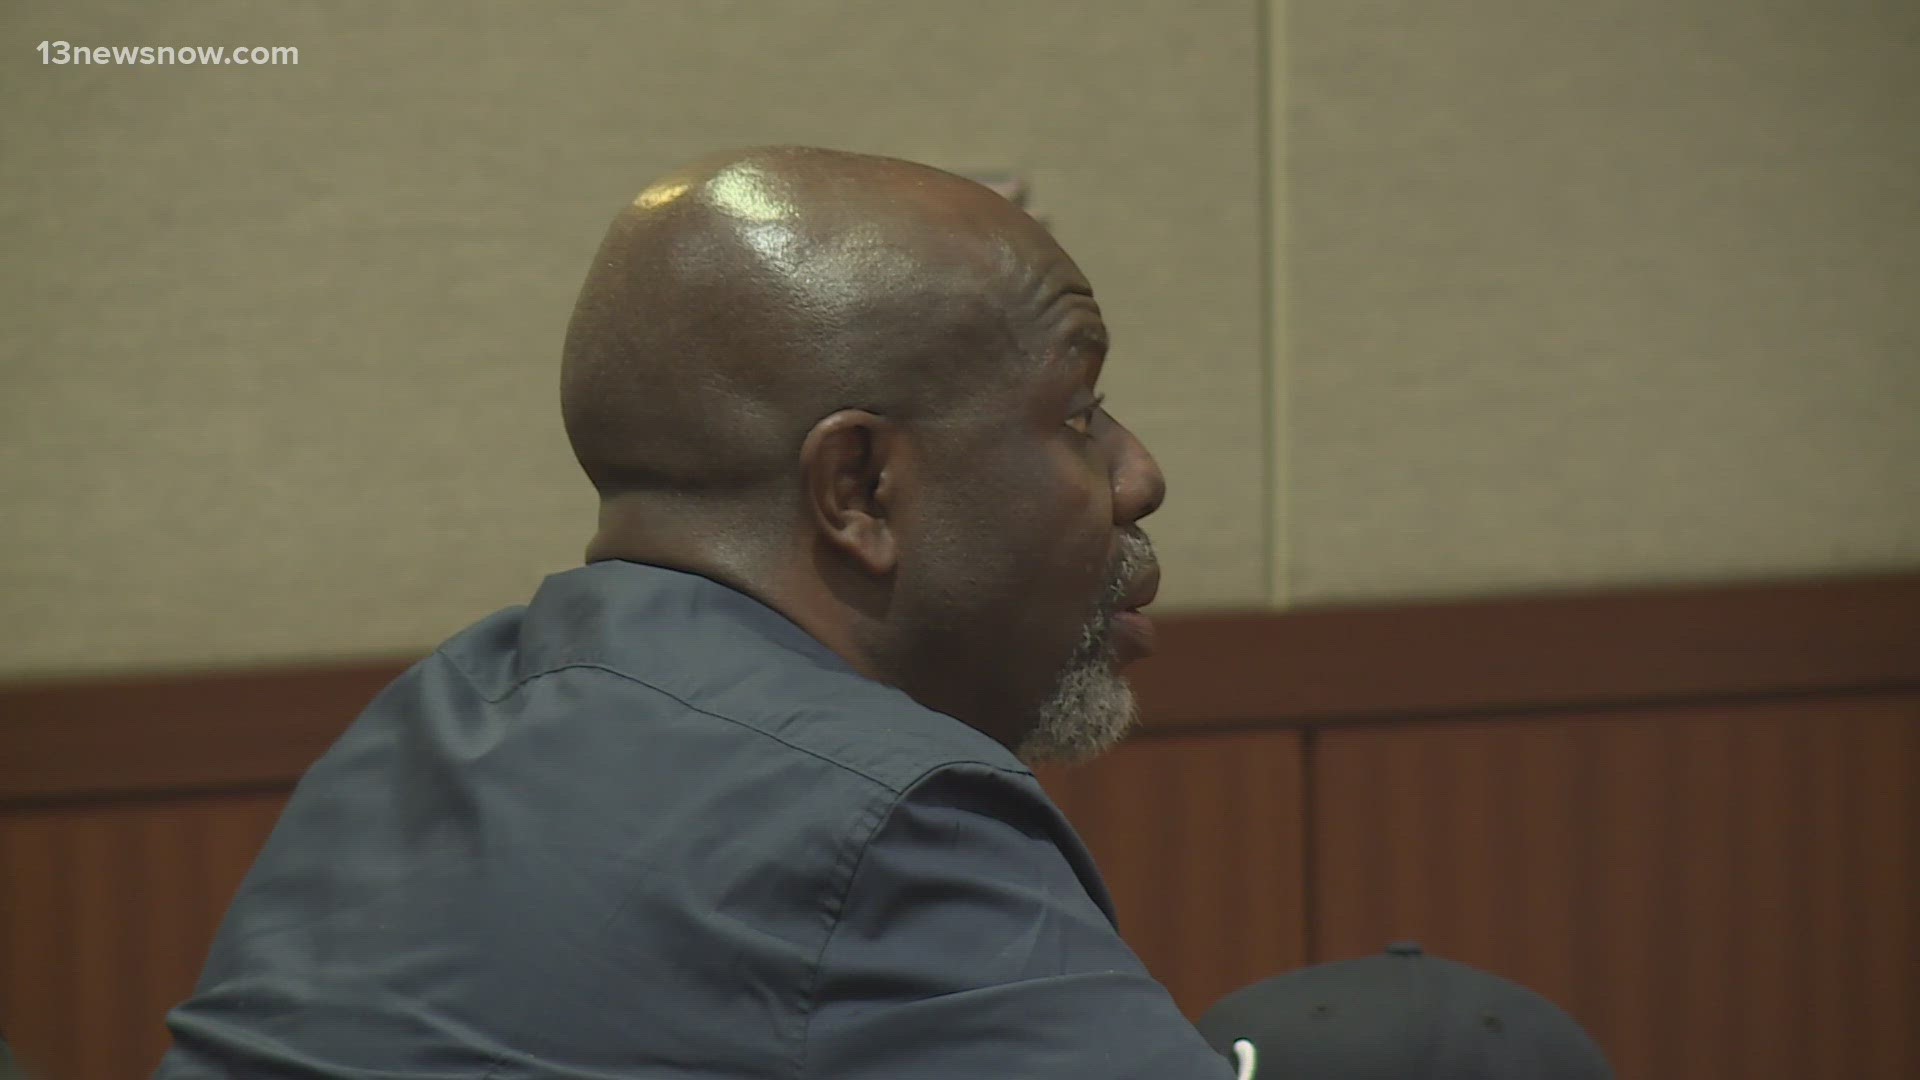 Several correctional officers at the Hampton Roads Regional Jail had testified about possible confessions Bigsby made during his time in jail about his son Codi.